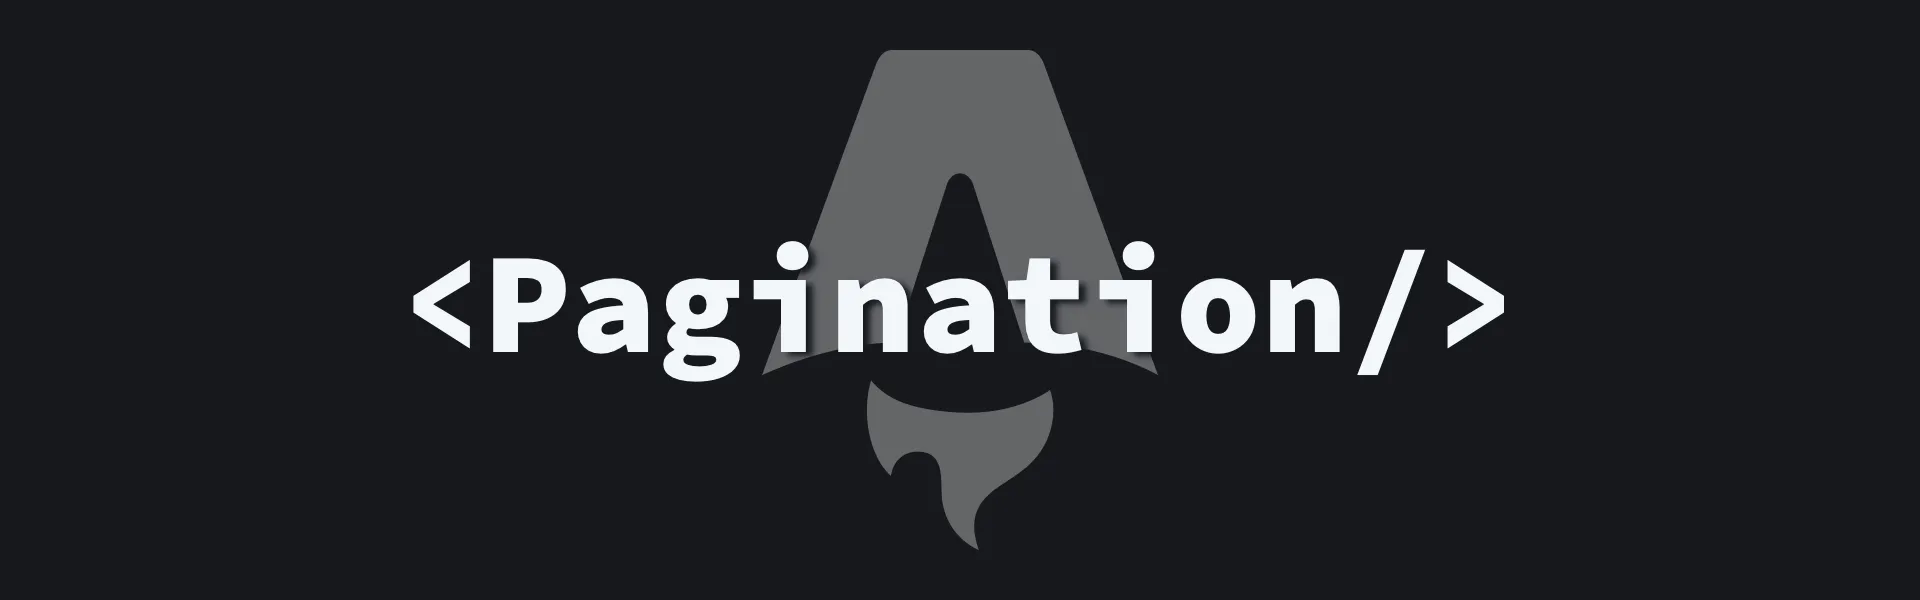 The Astro logo in the background, with a <Pagination /> component in white in the foreground